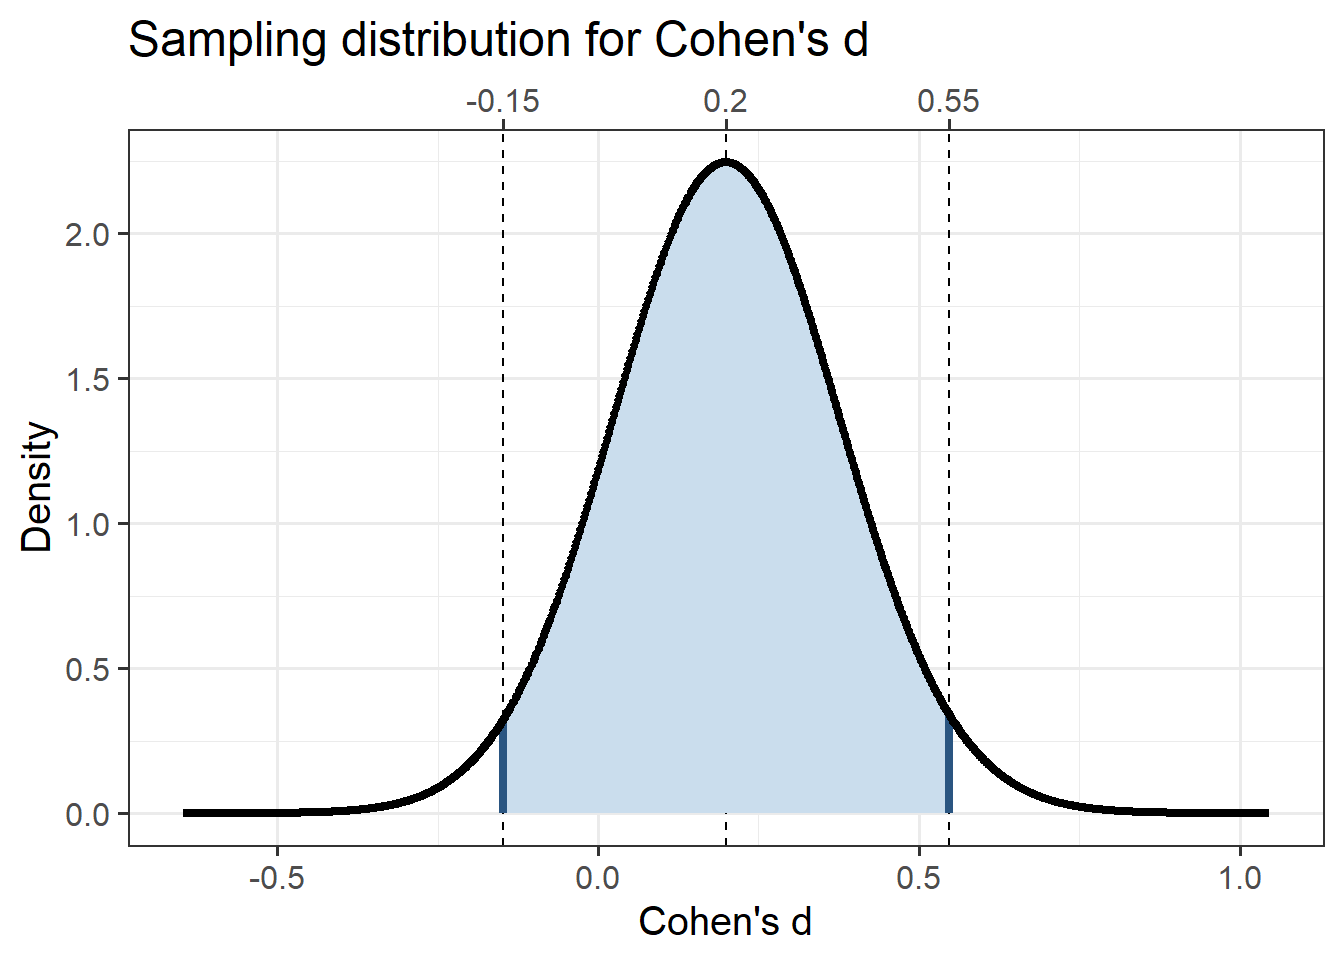 Cohen's d's sampling distribution for a small population effect size (d = 0.2) and for a 2-cell design with 80\% power (i.e. 64 participants per group).